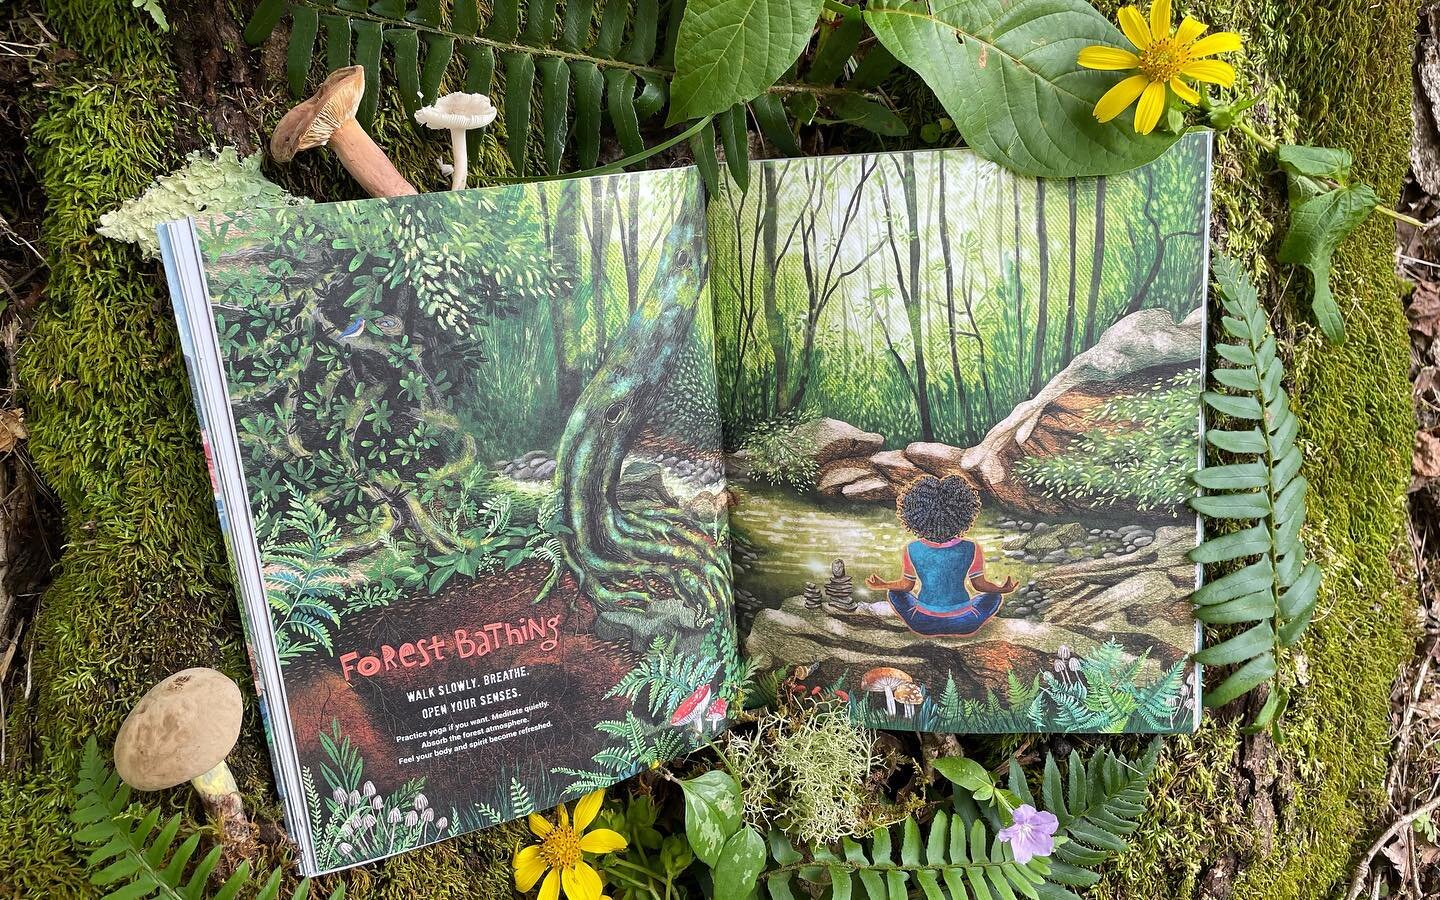 Now I that I have printed books, I can share some of my favorite spreads from Rise &amp; Roar. This section introduces the Japanese concept of Forest Bathing. Spending quiet time absorbing the calming energy of the forest, deep breathing, and feeling